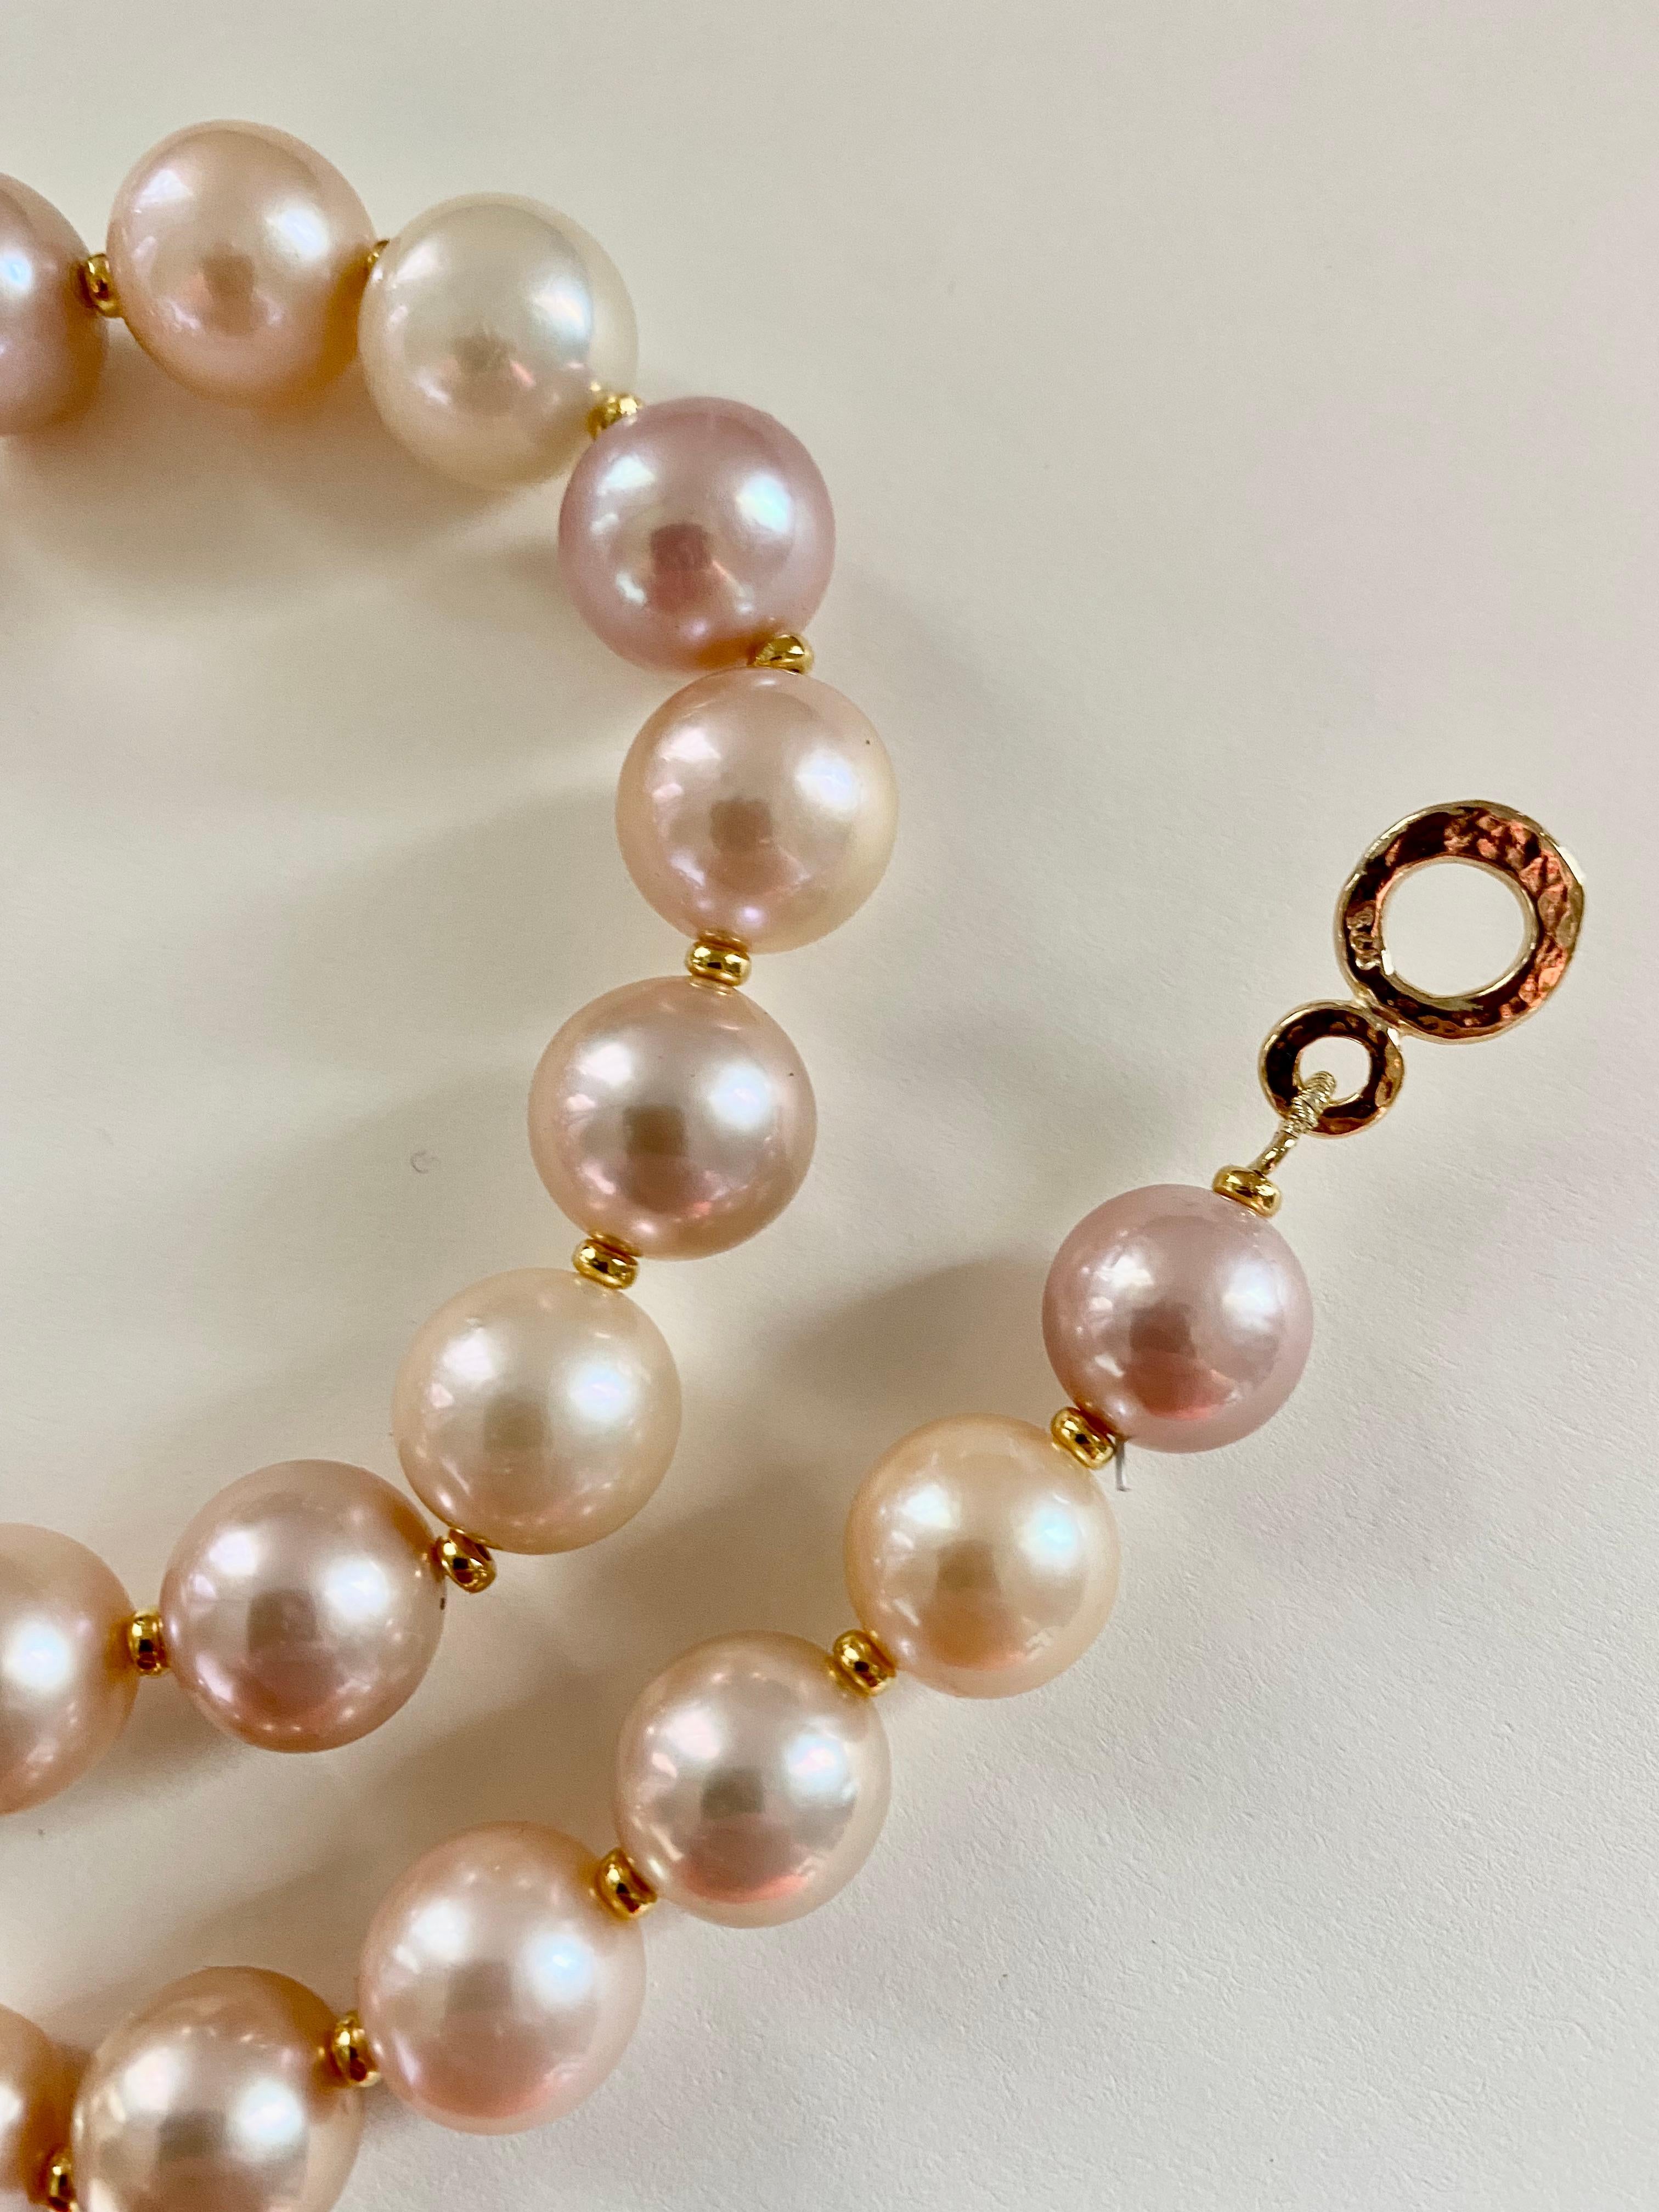 cultured freshwater pearls meaning